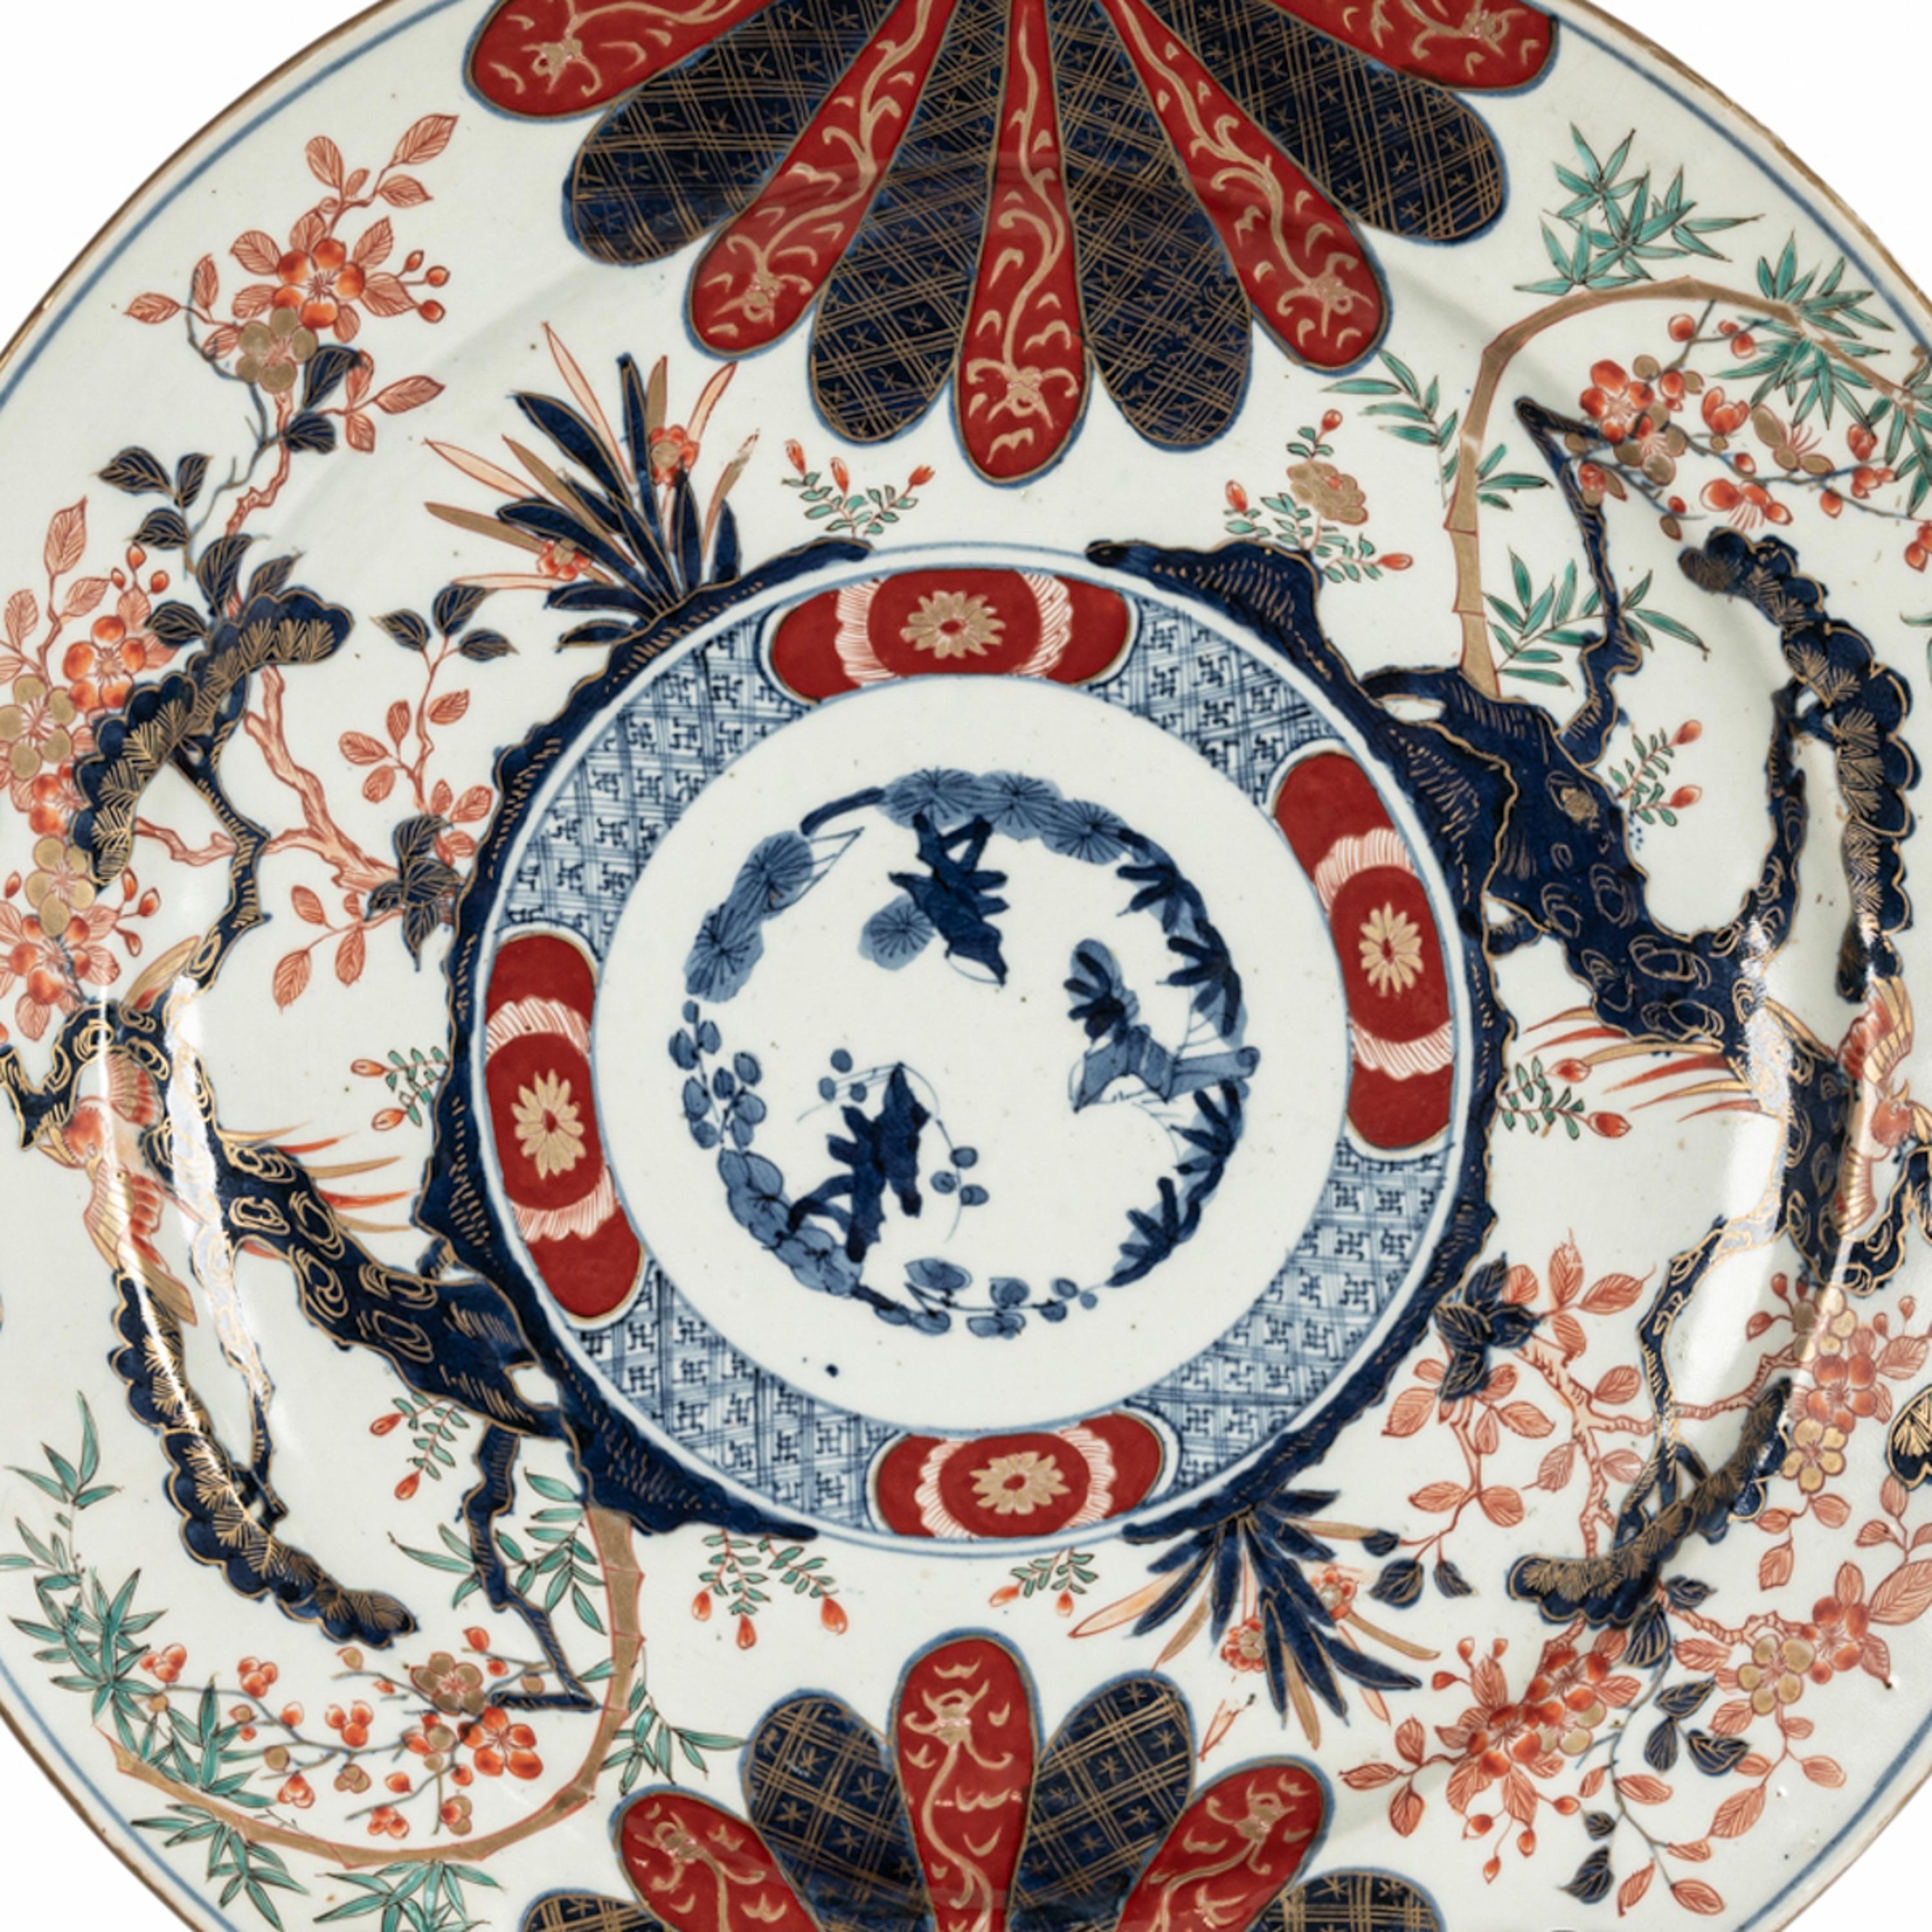 Monumental Antique Japanese Meiji Period Imari Porcelain Charger Plate 1880 For Sale 1